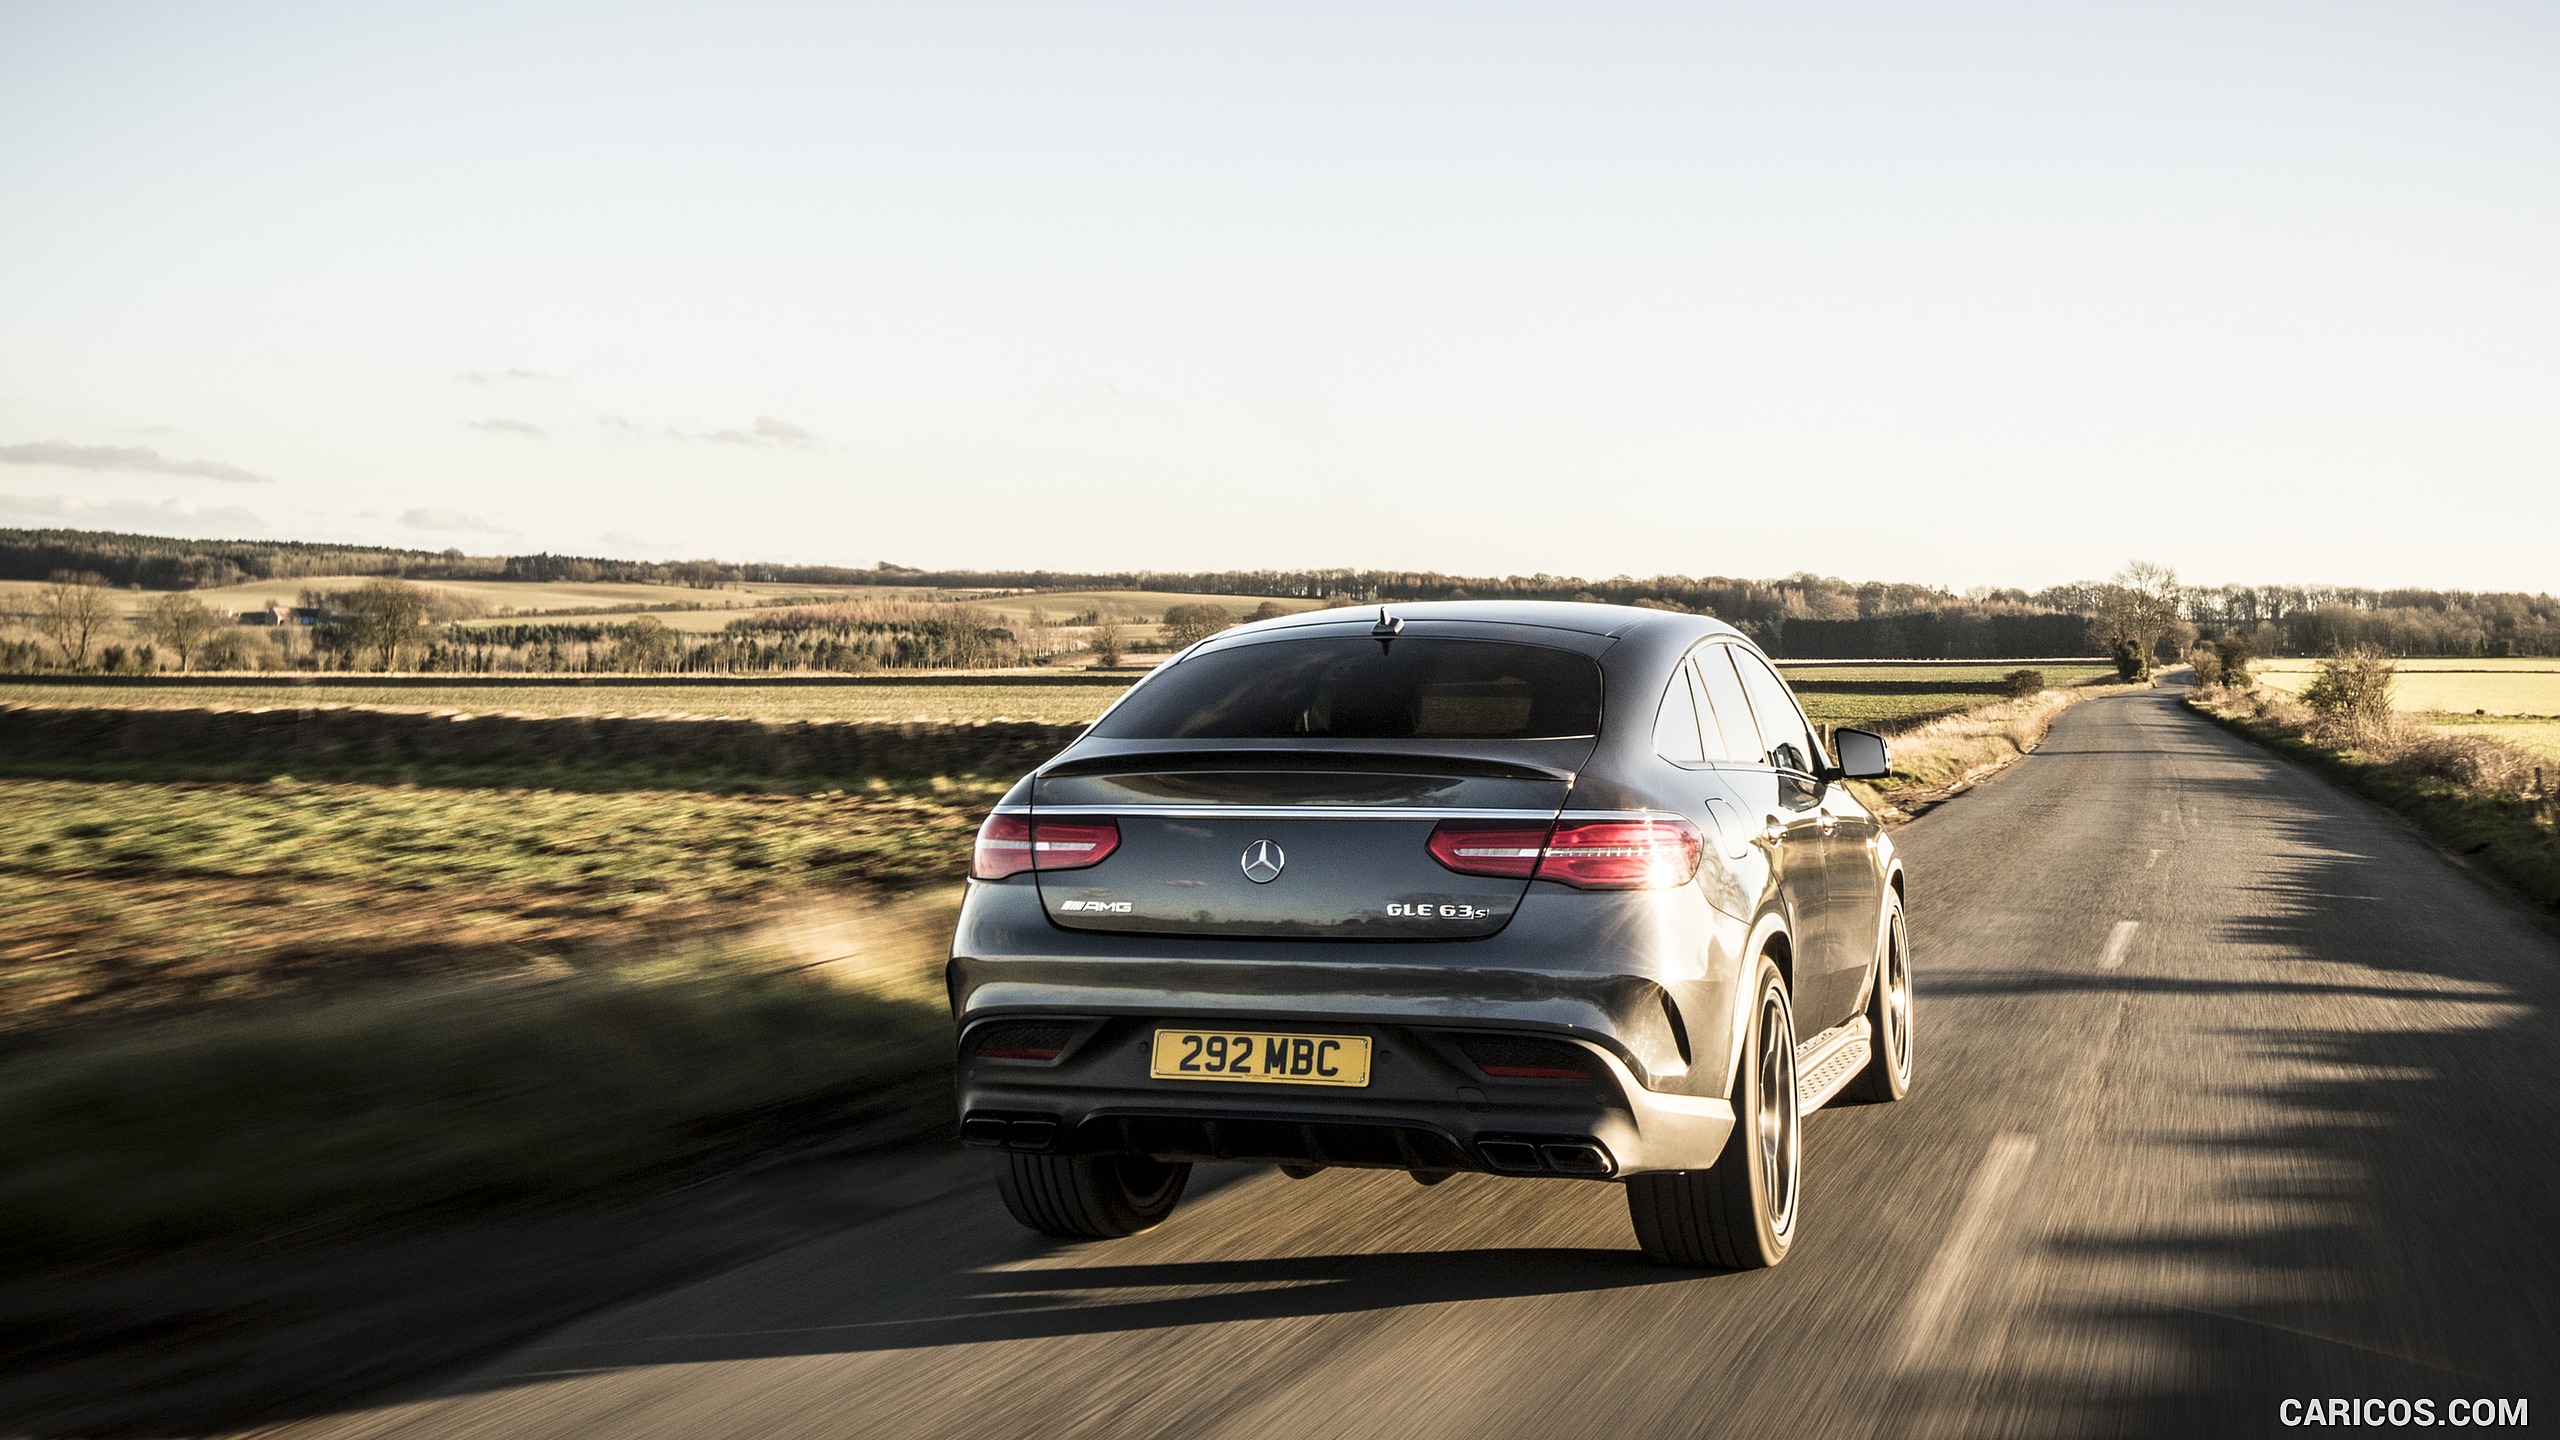 2016 Mercedes-AMG GLE 63 S Coupe (UK-Spec) - Rear, #47 of 65